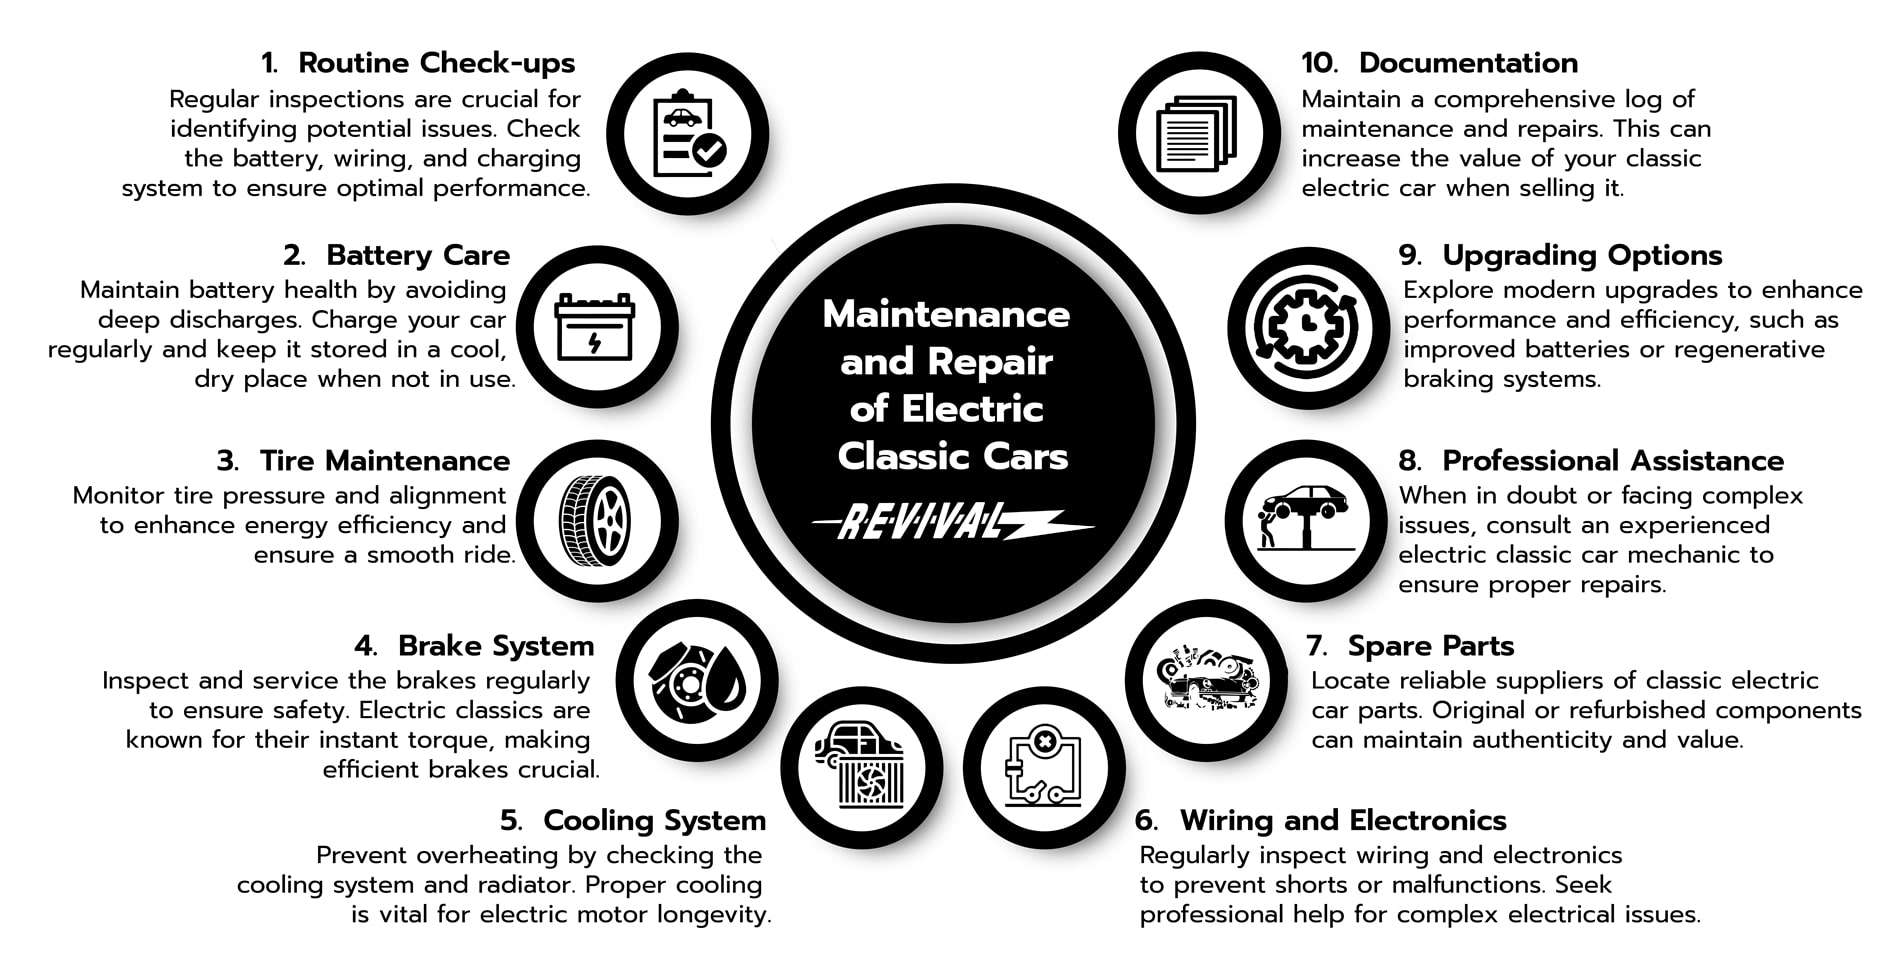 Electric Classic Car Maintenance Infographic - A guide to maintaining and repairing electric classic cars for optimal performance and sustainability.